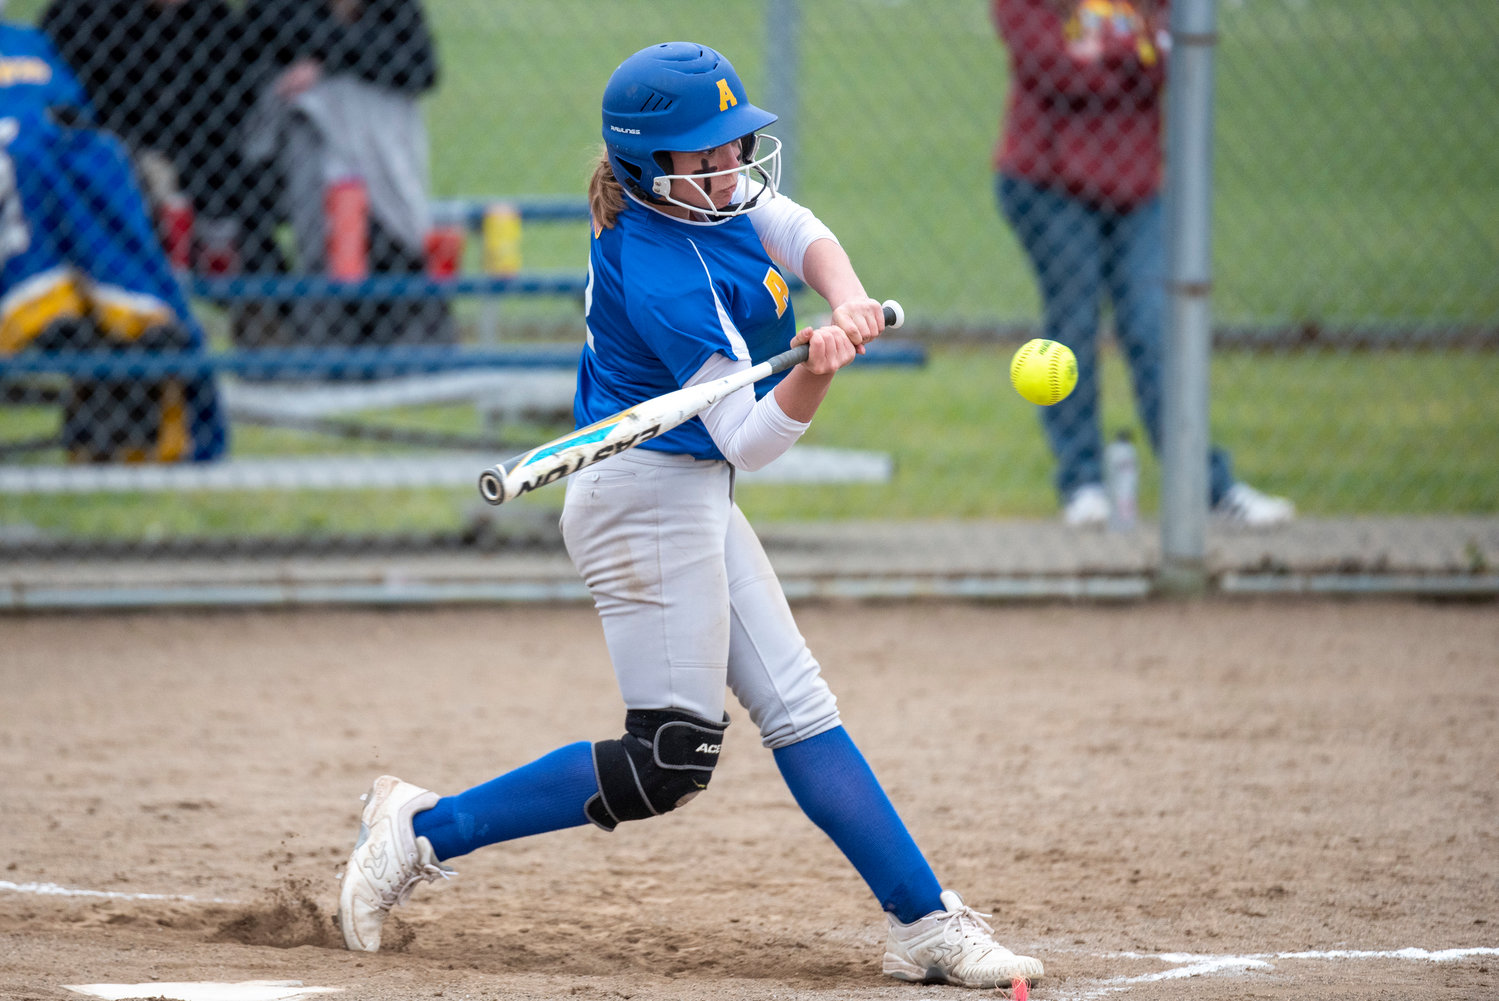 Adna's Ava Simms lines up a Castle Rock pitch during a home game on April 1.